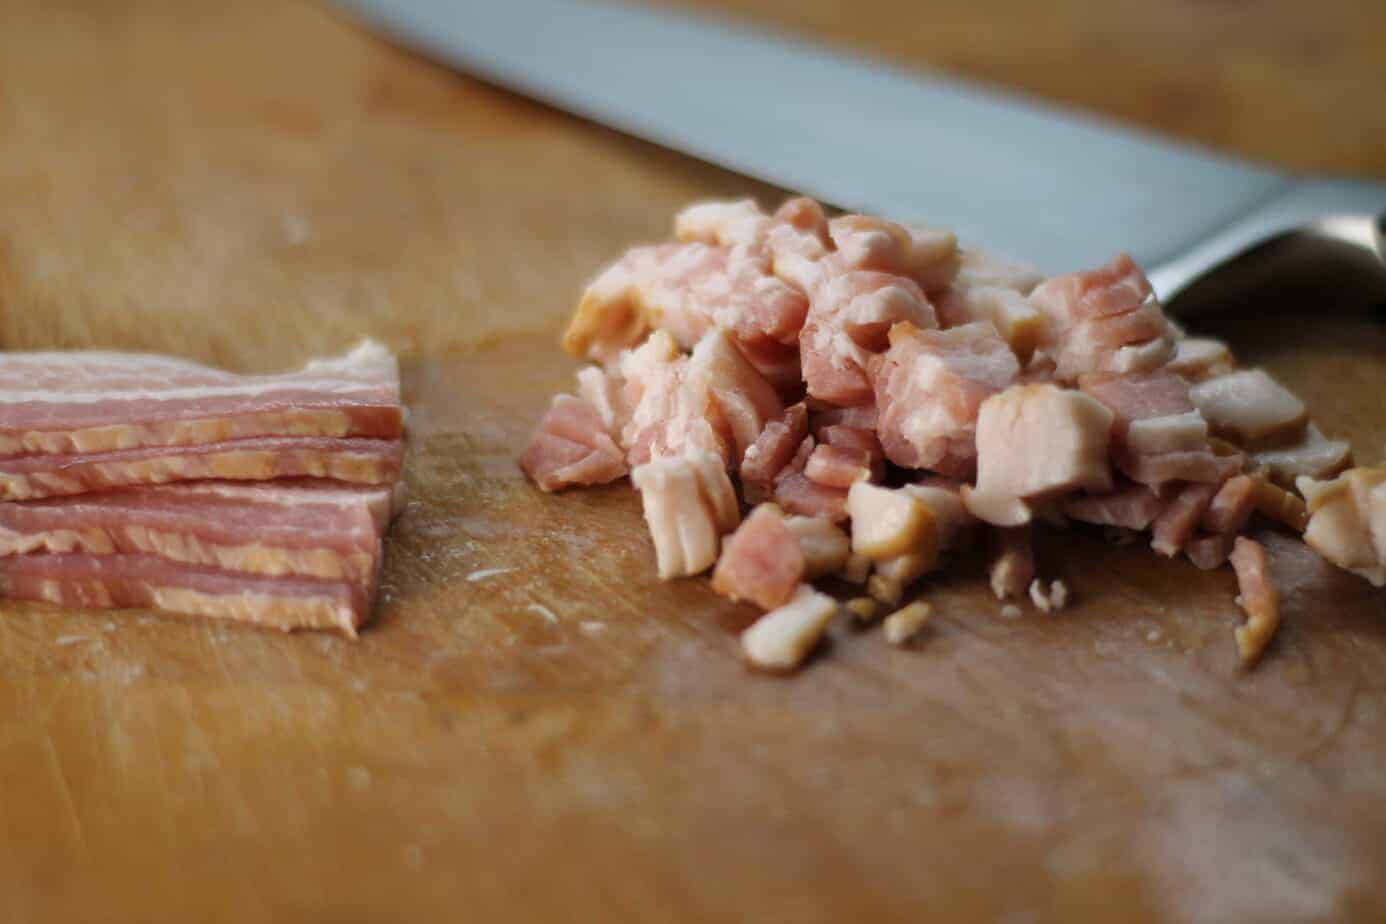 Diced raw bacon on a wooden cutting board